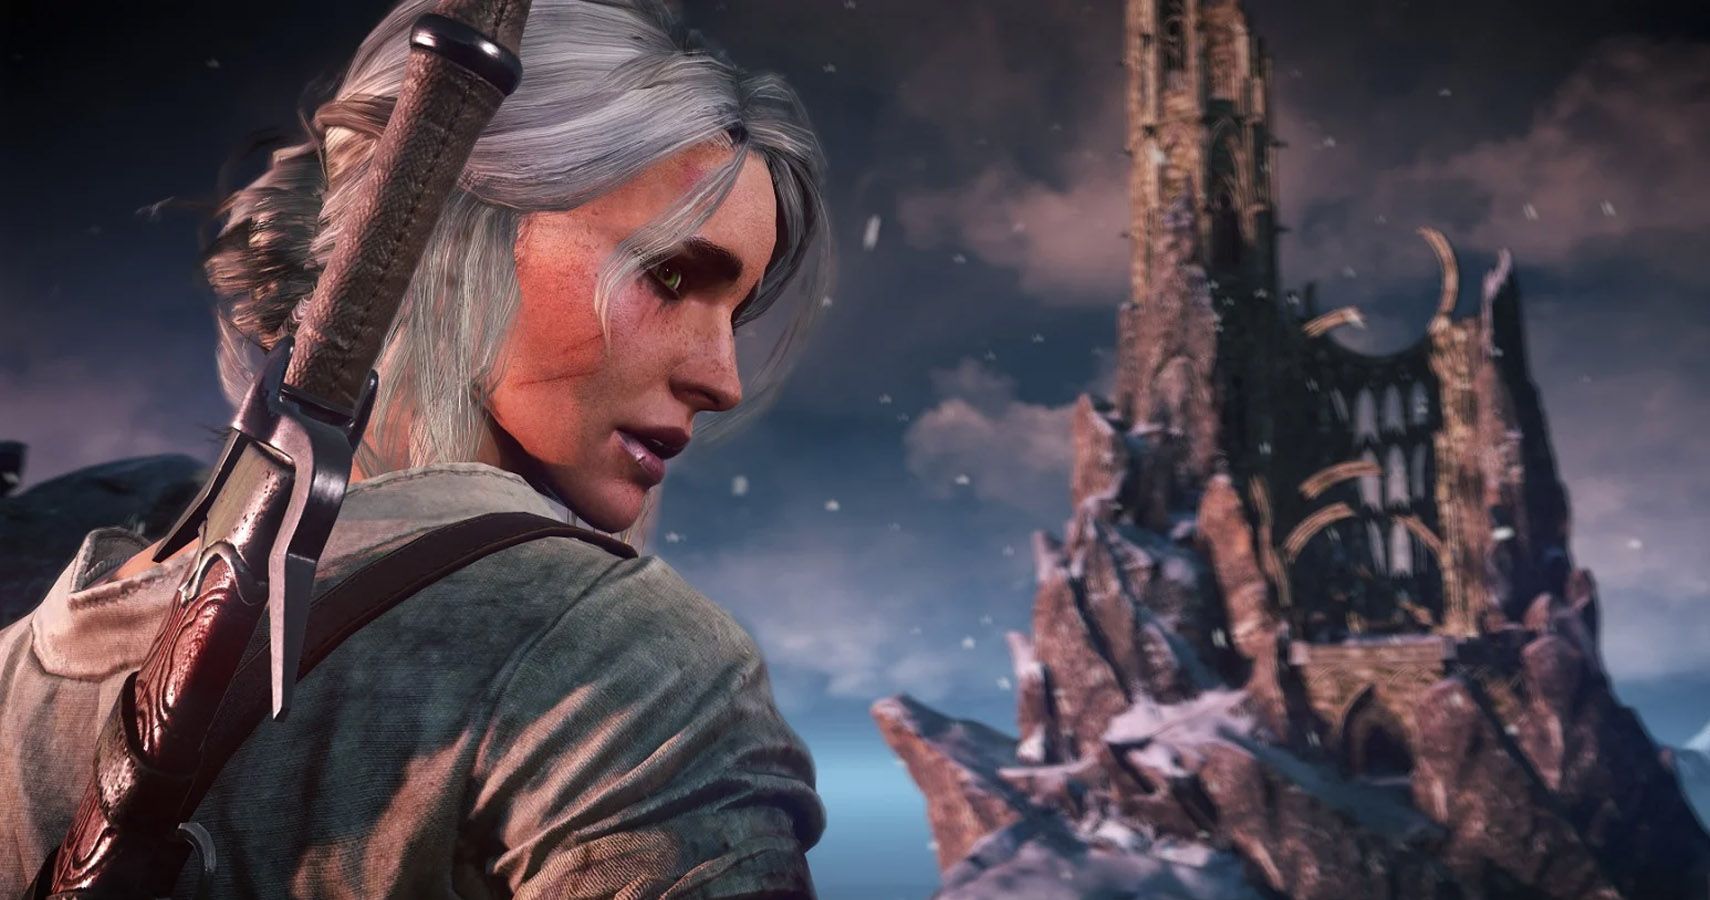 All 5 Groups Hunting Ciri In The Witcher Season 3 (& Why)